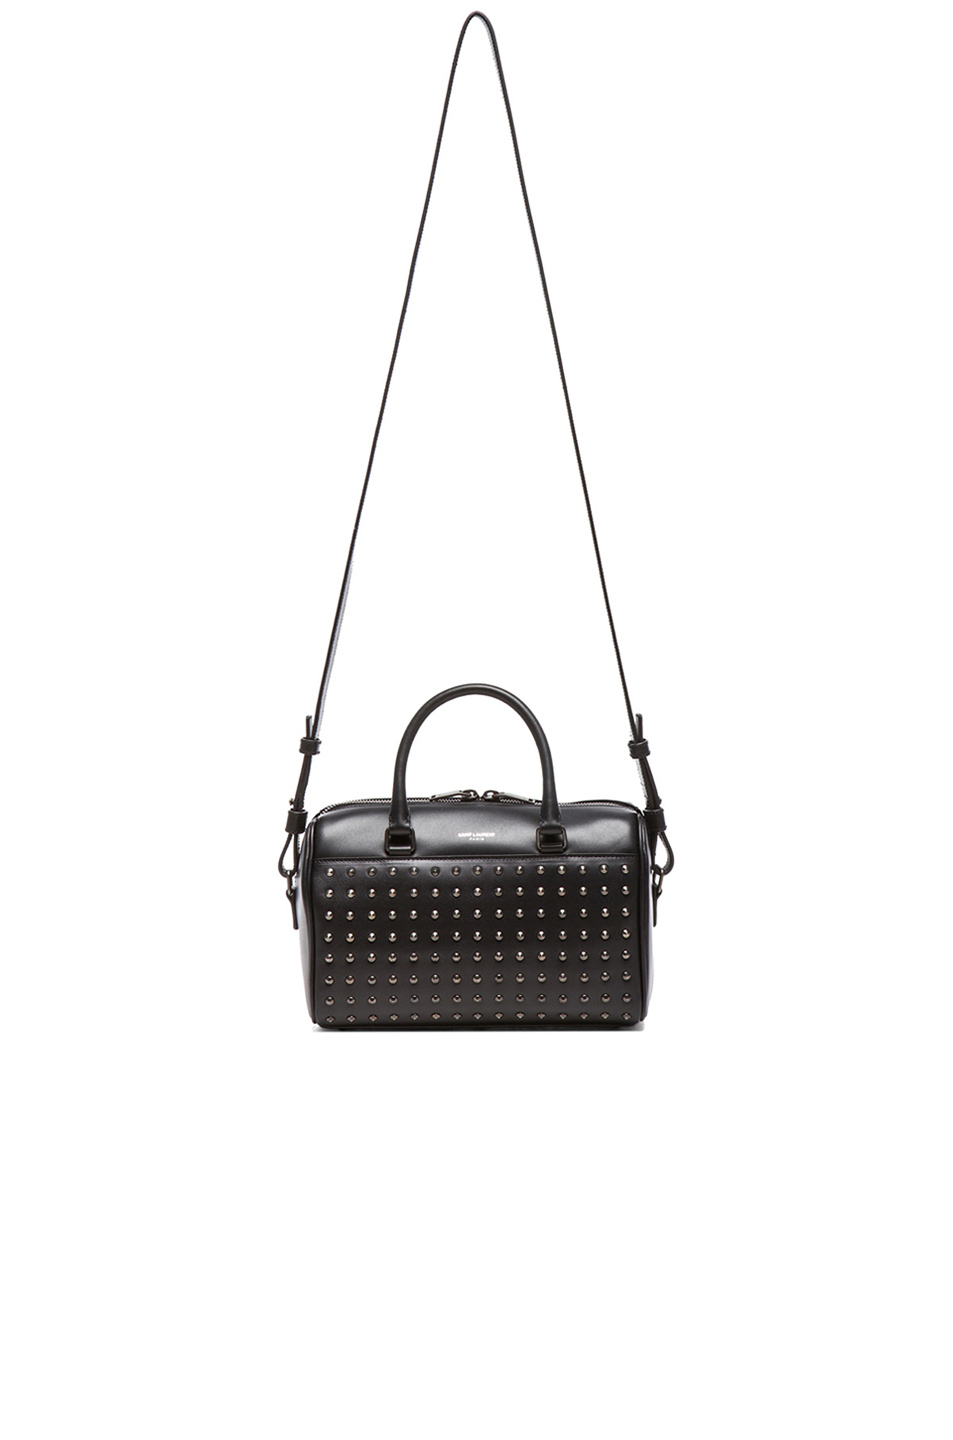 Saint Laurent Leather Studded Baby Duffle Bag in Black - Lyst